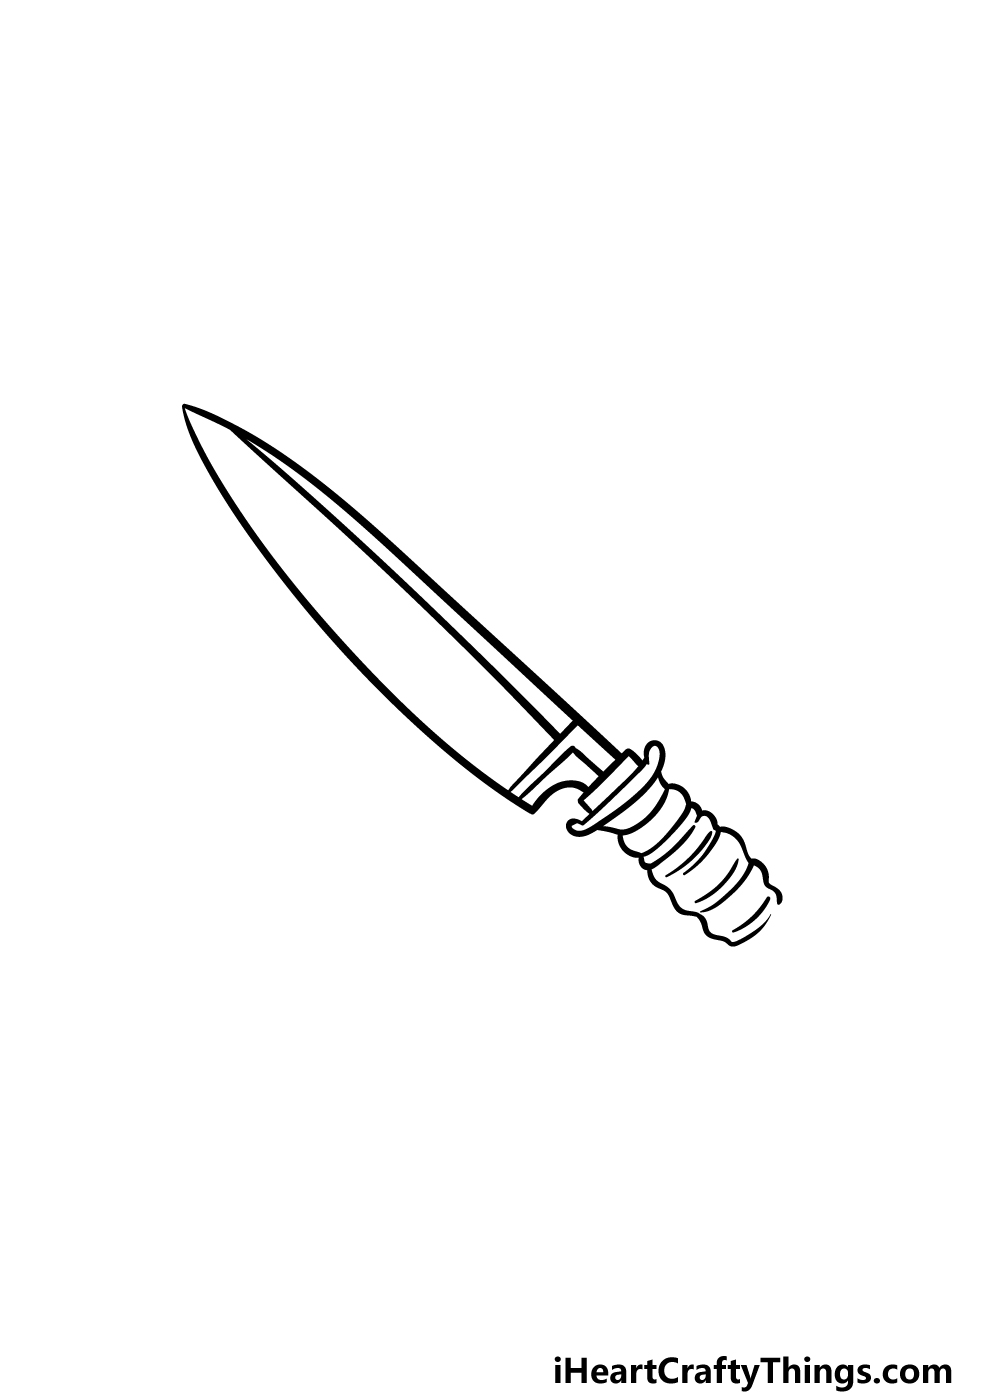 drawing a knife step 4